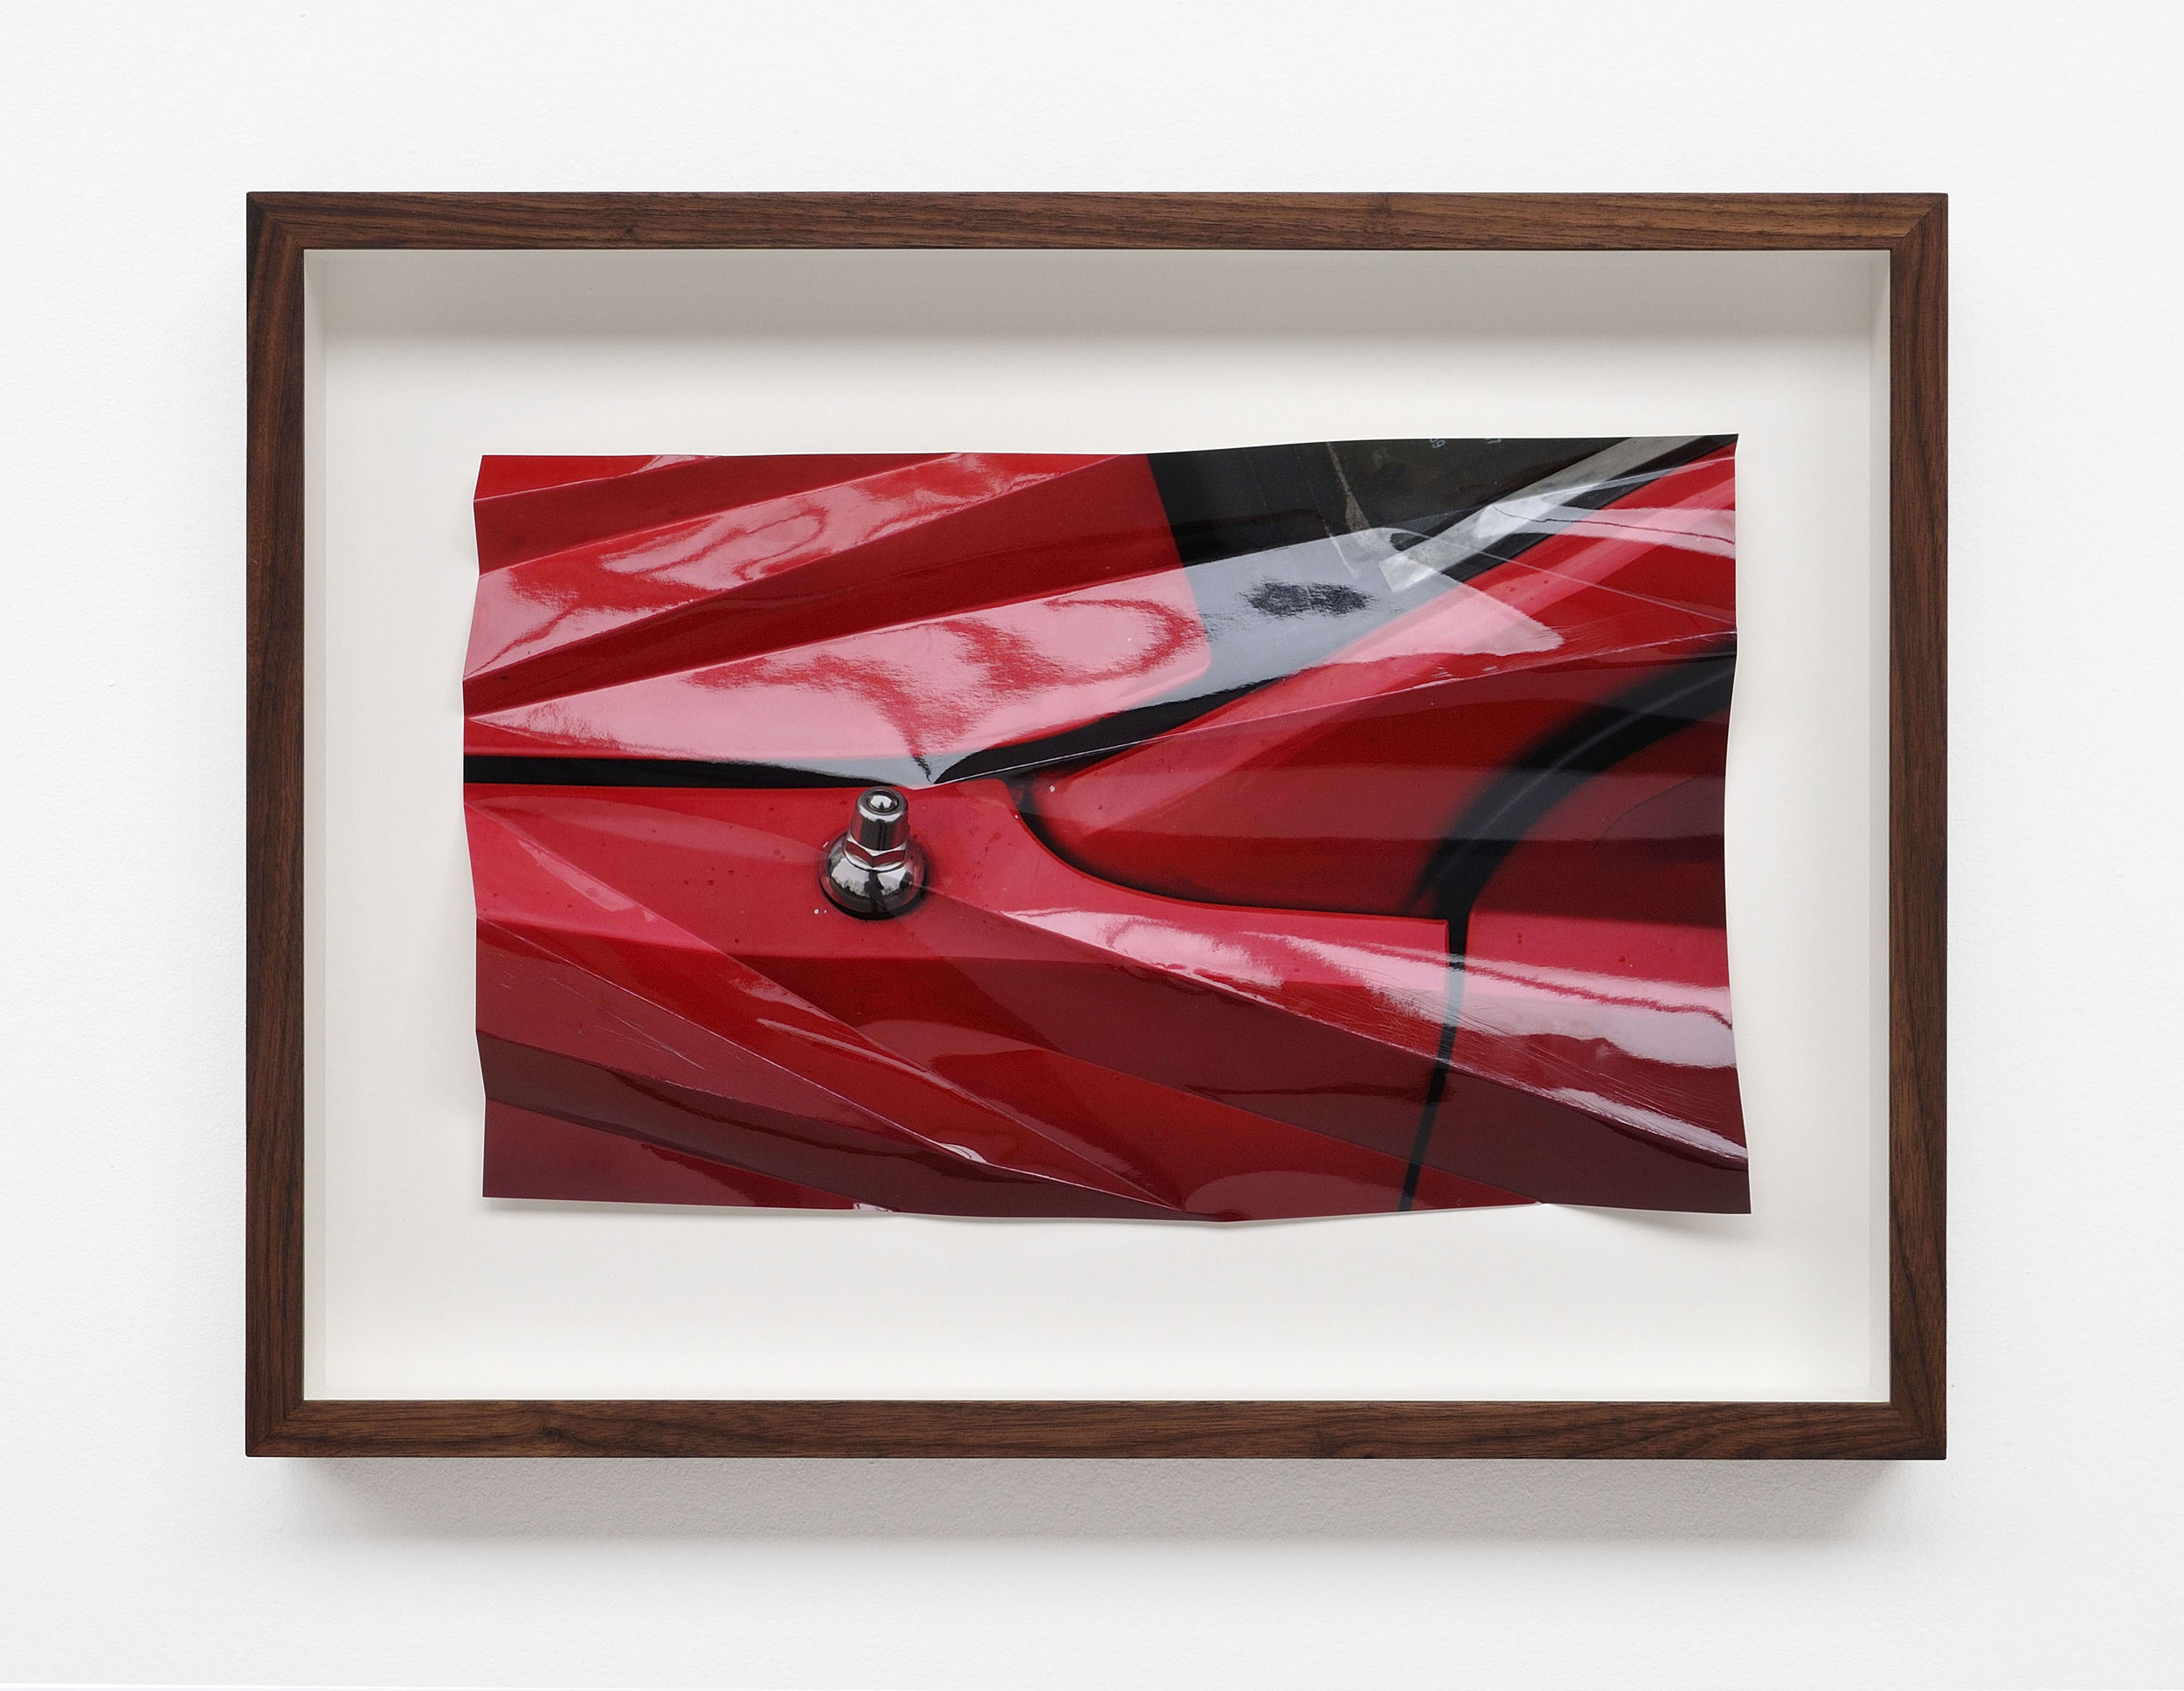  from the series: Red Crash, 2017, color photography, folded, 30 x 44 cm 